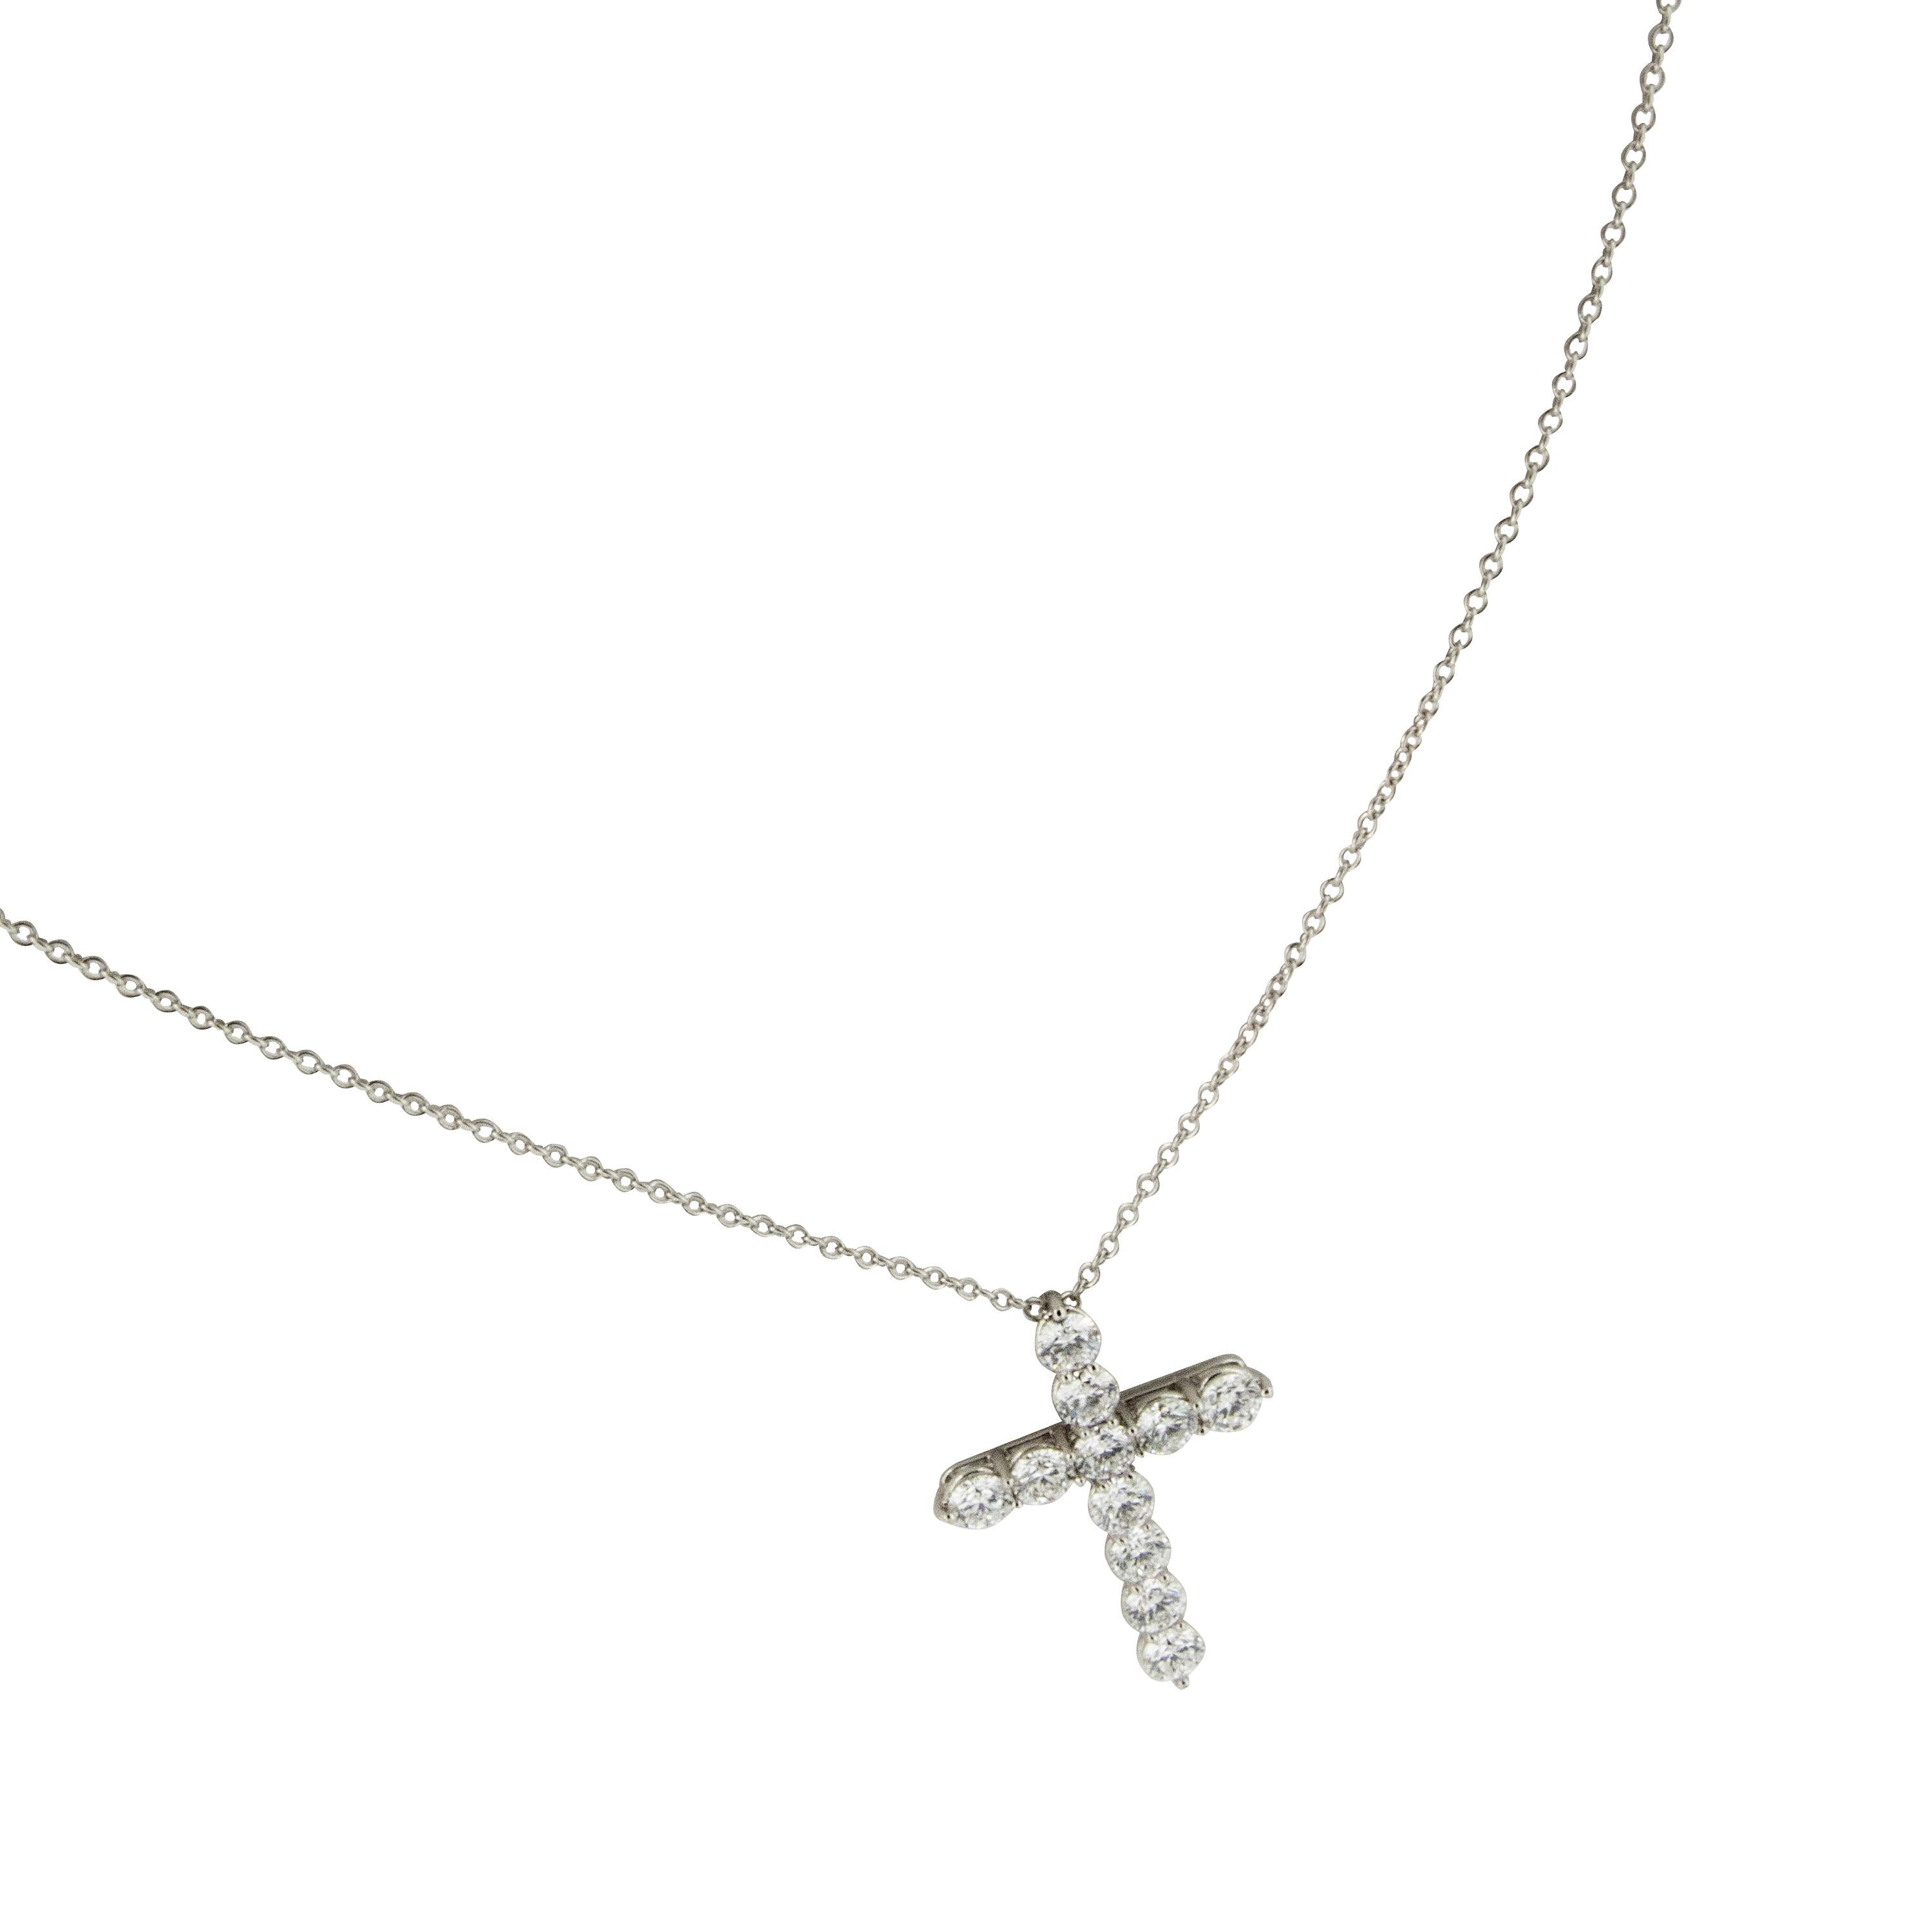 Hand constructed of noble platinum, this timeless diamond cross is set with exceptionally fine diamonds = 1.65 Cttw & being F/G color & VS clarity  suspended on a platinum cable chain 16